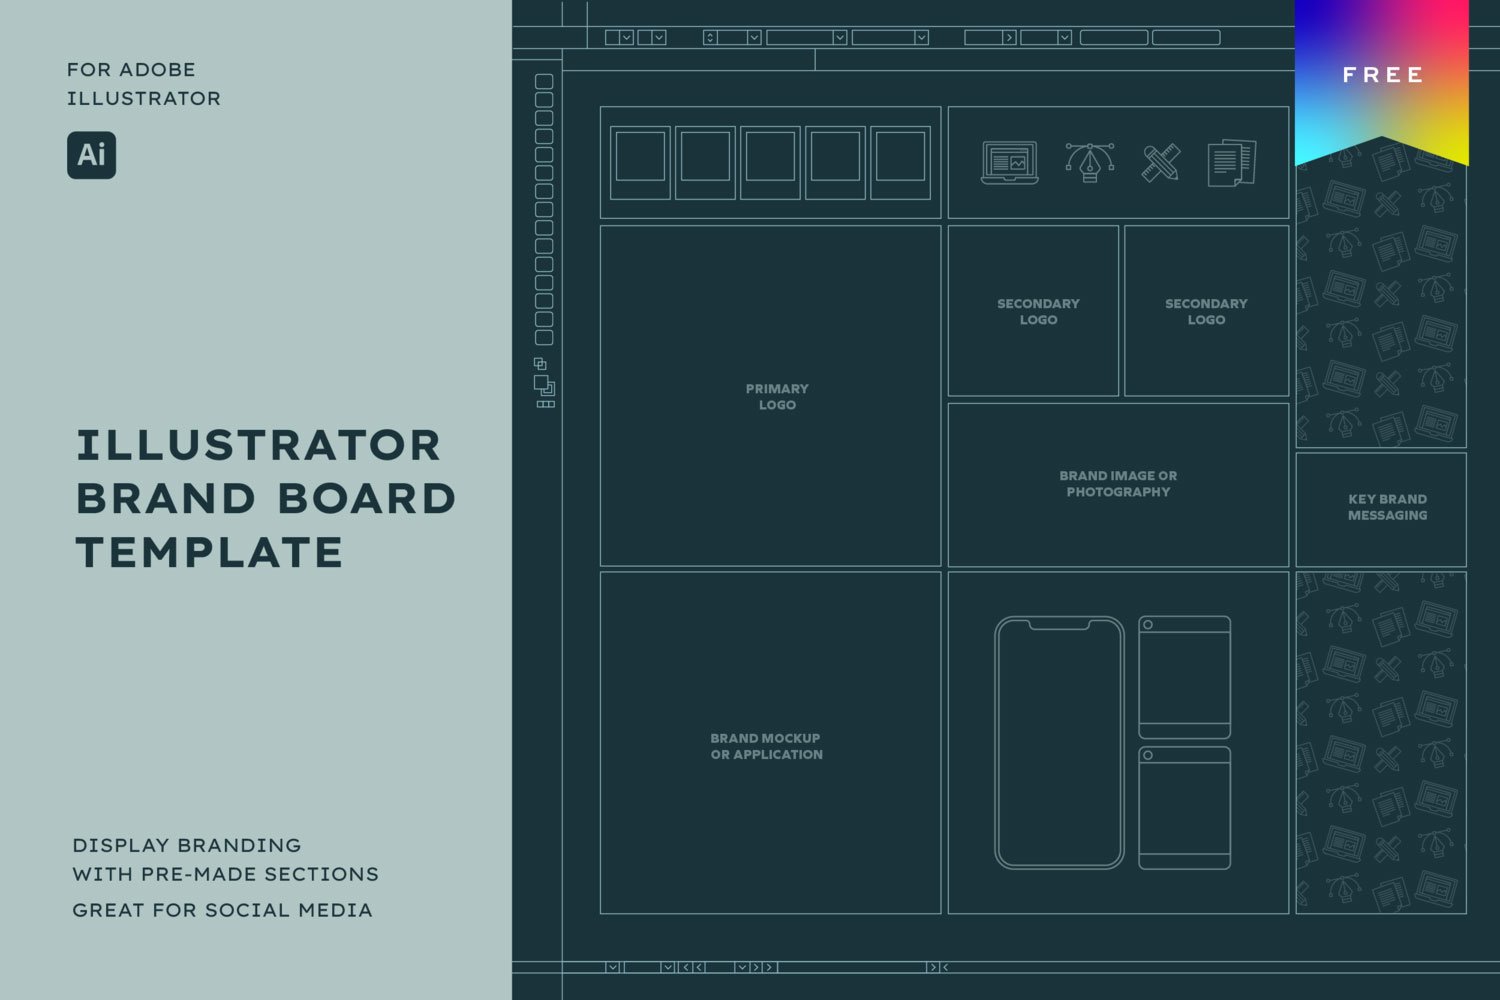 Free Adobe Illustrator Brand Board Template with Mobile and Instagram